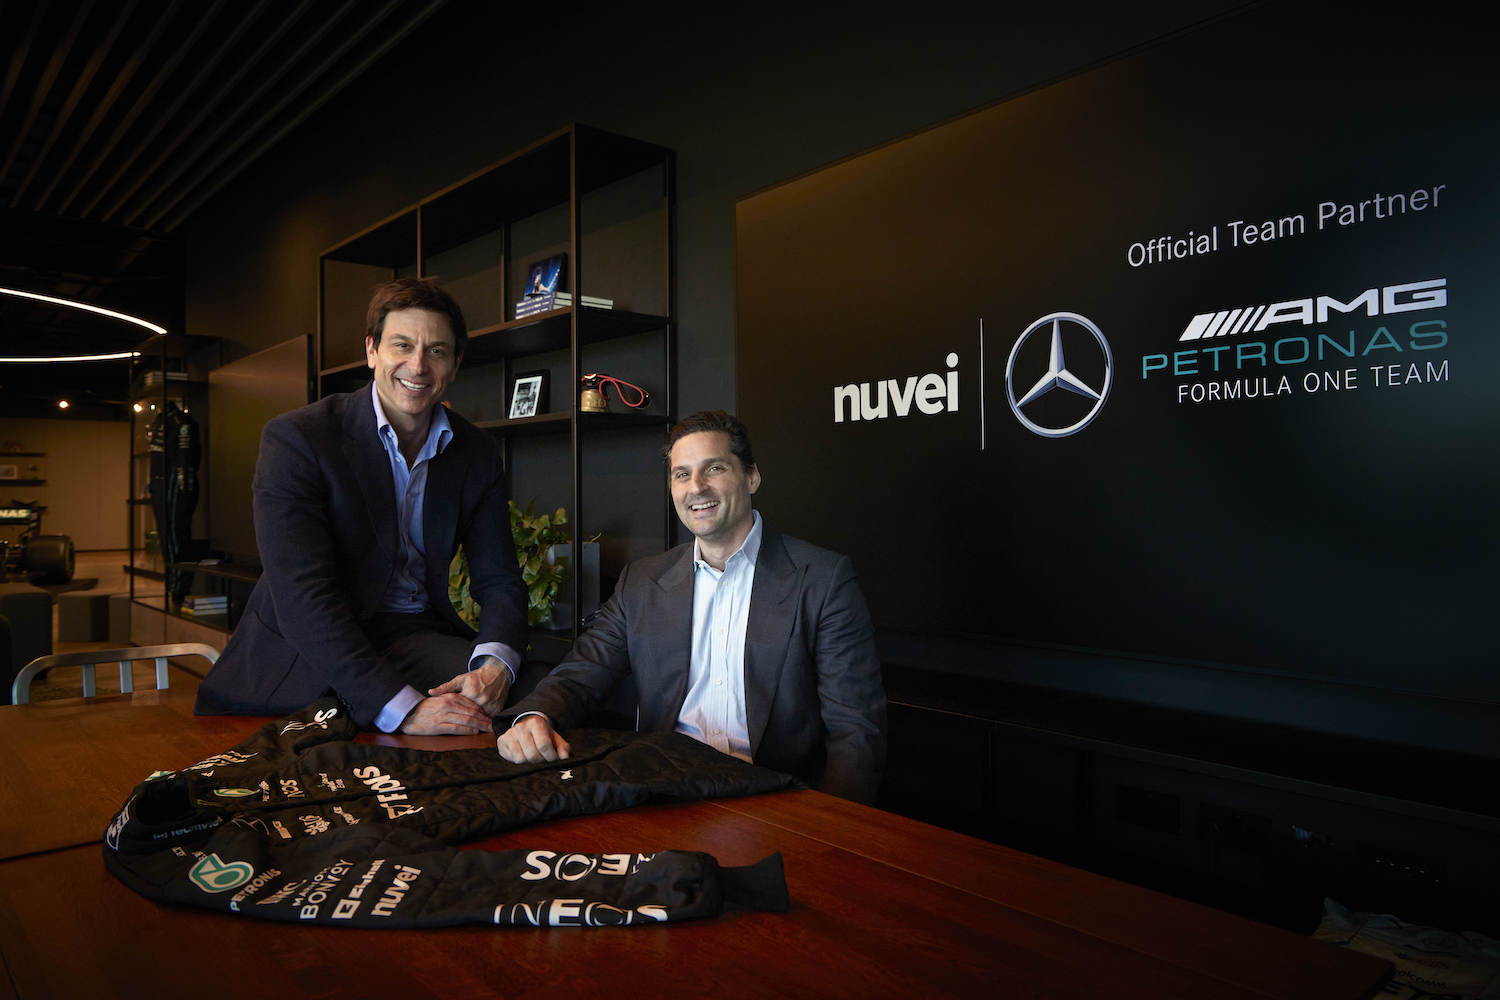 Nuvei and mercedes-amg f1 team